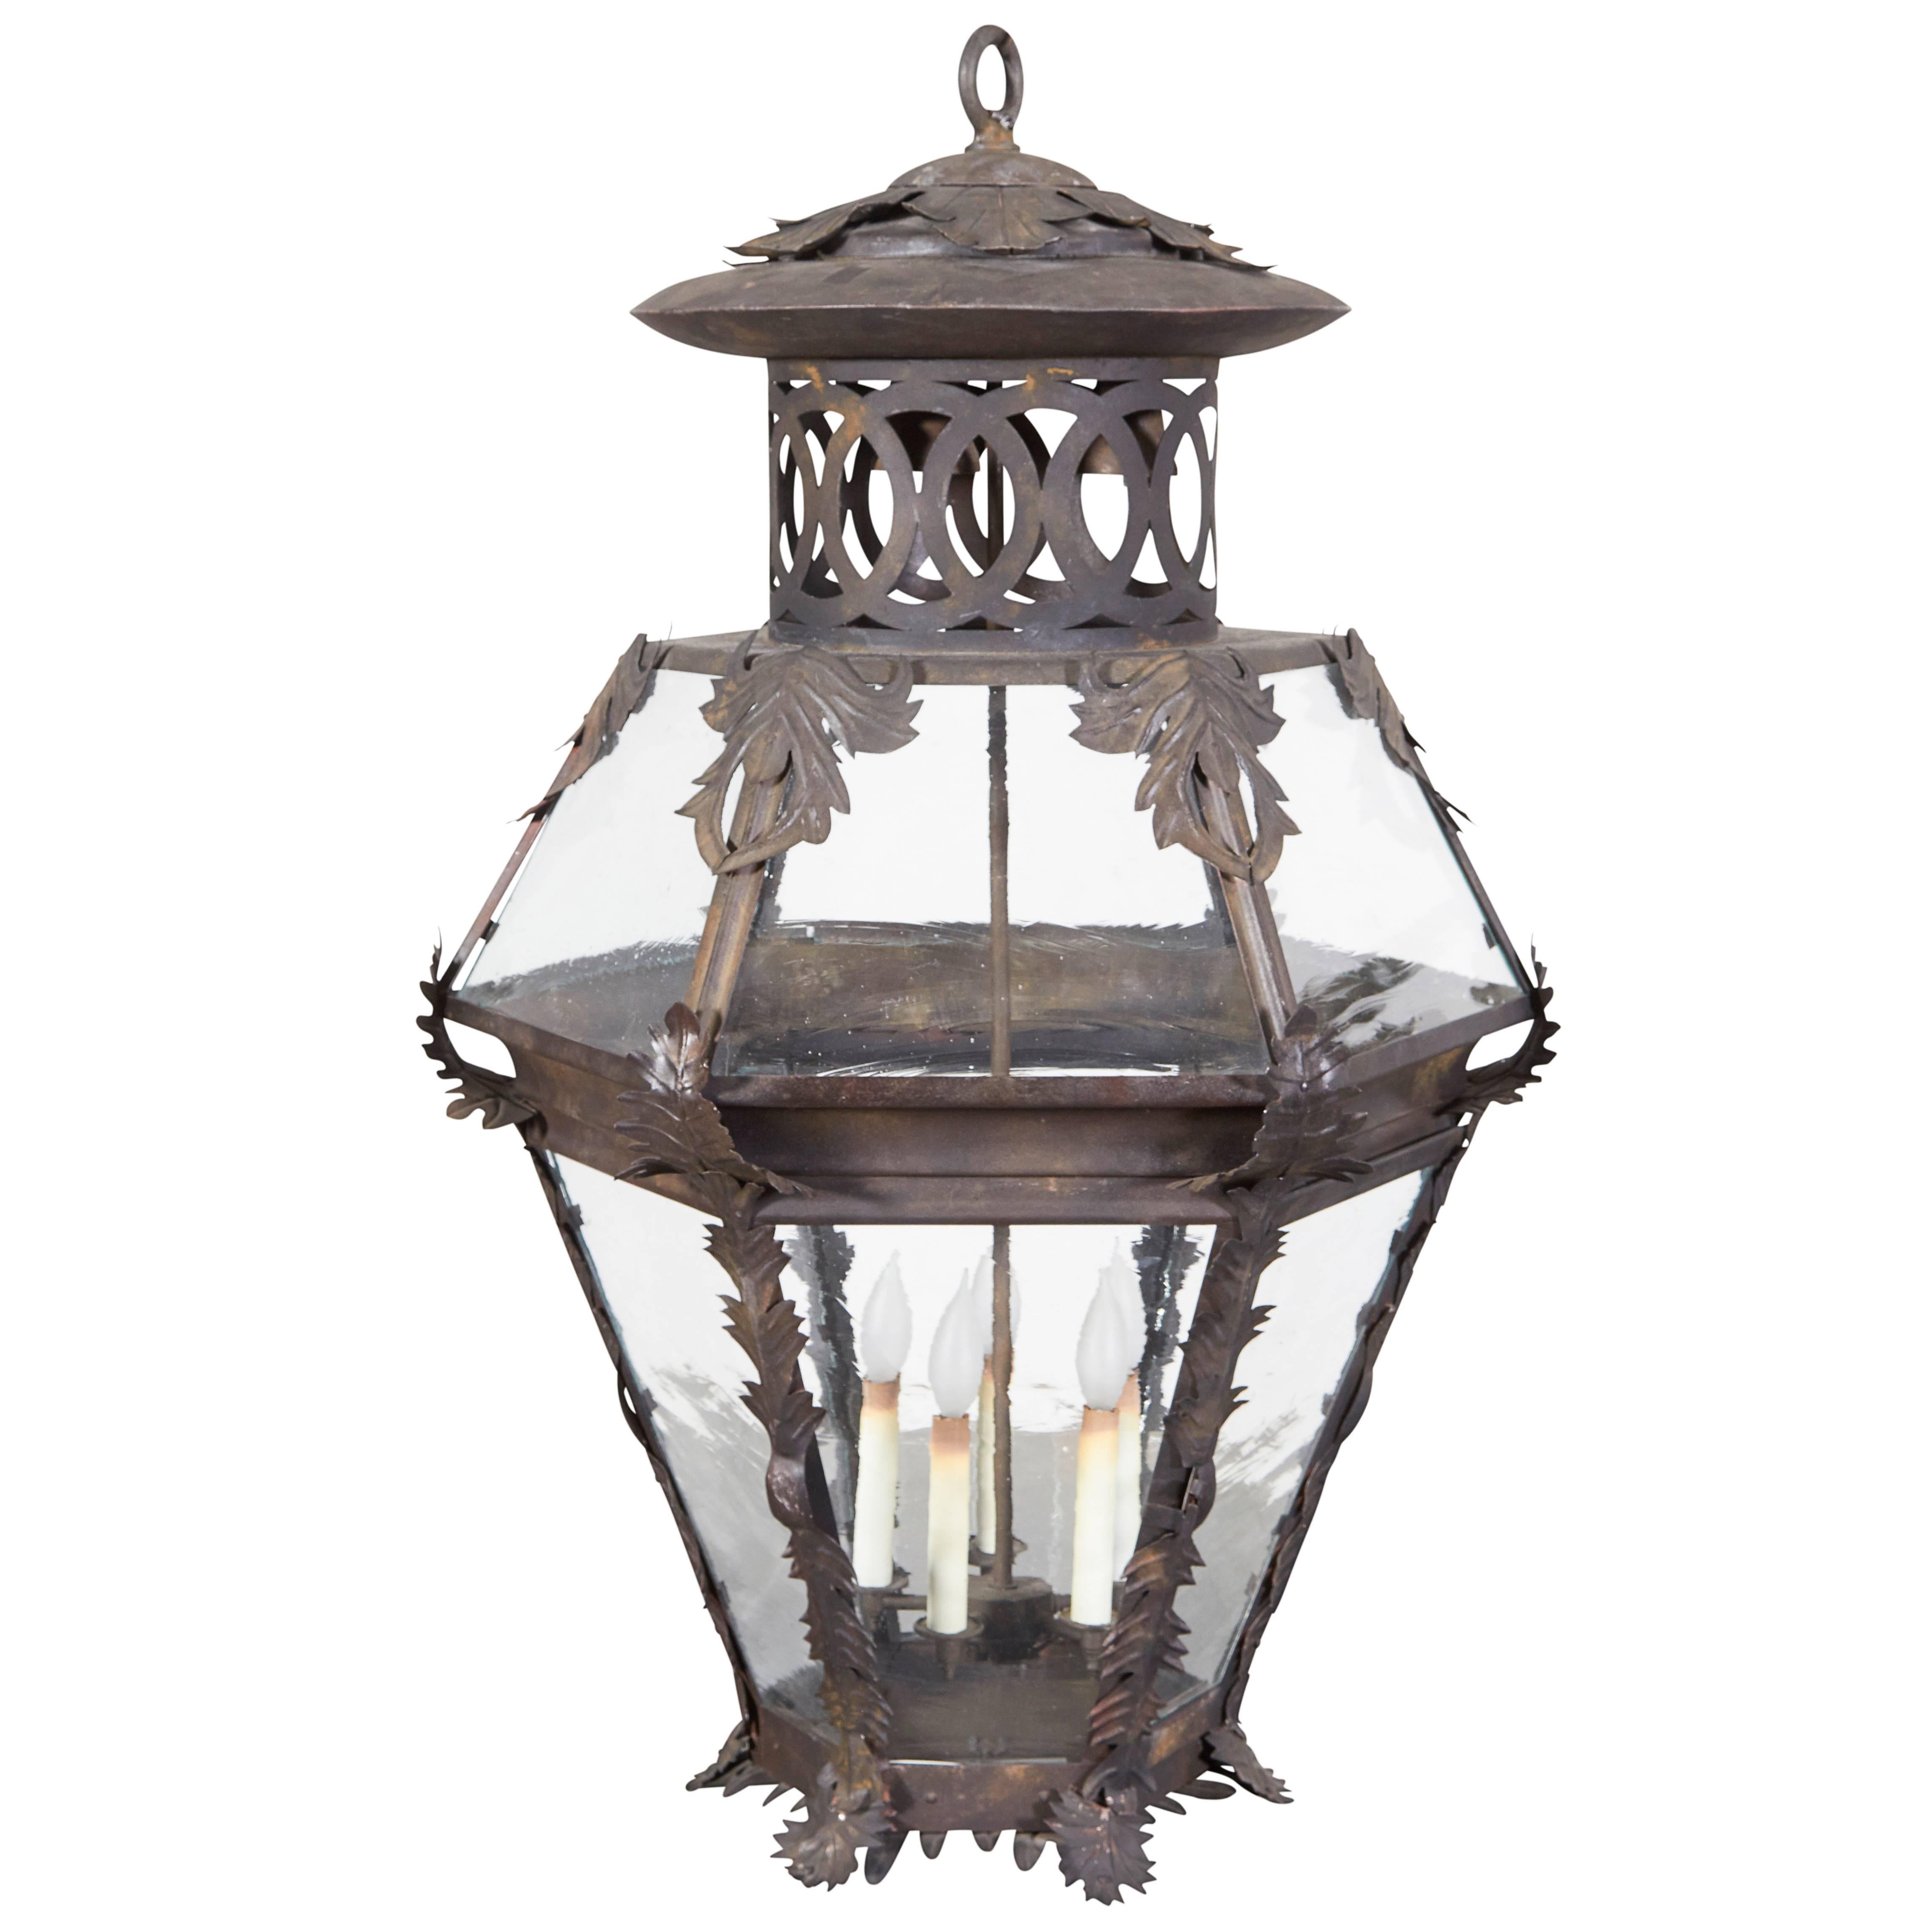 Large-Scale Patinated Iron and Glass Lantern